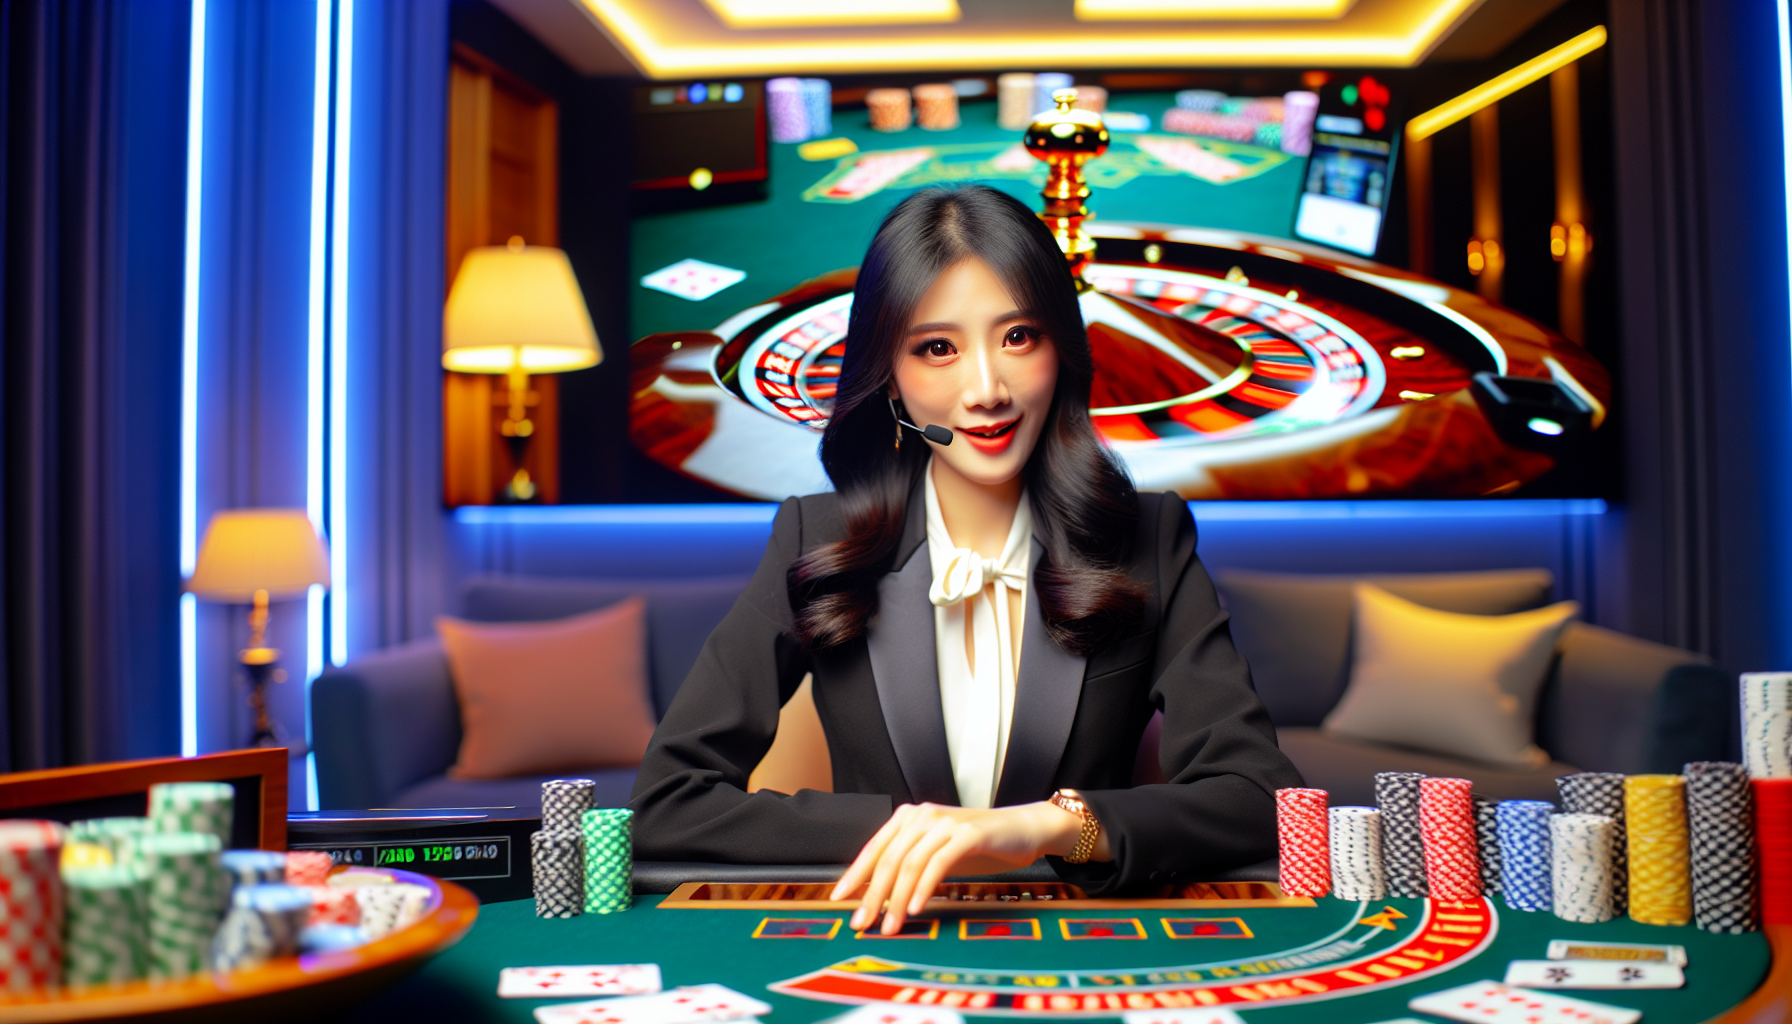 Live Dealer Games: Bringing the Casino Experience Home with classic table games